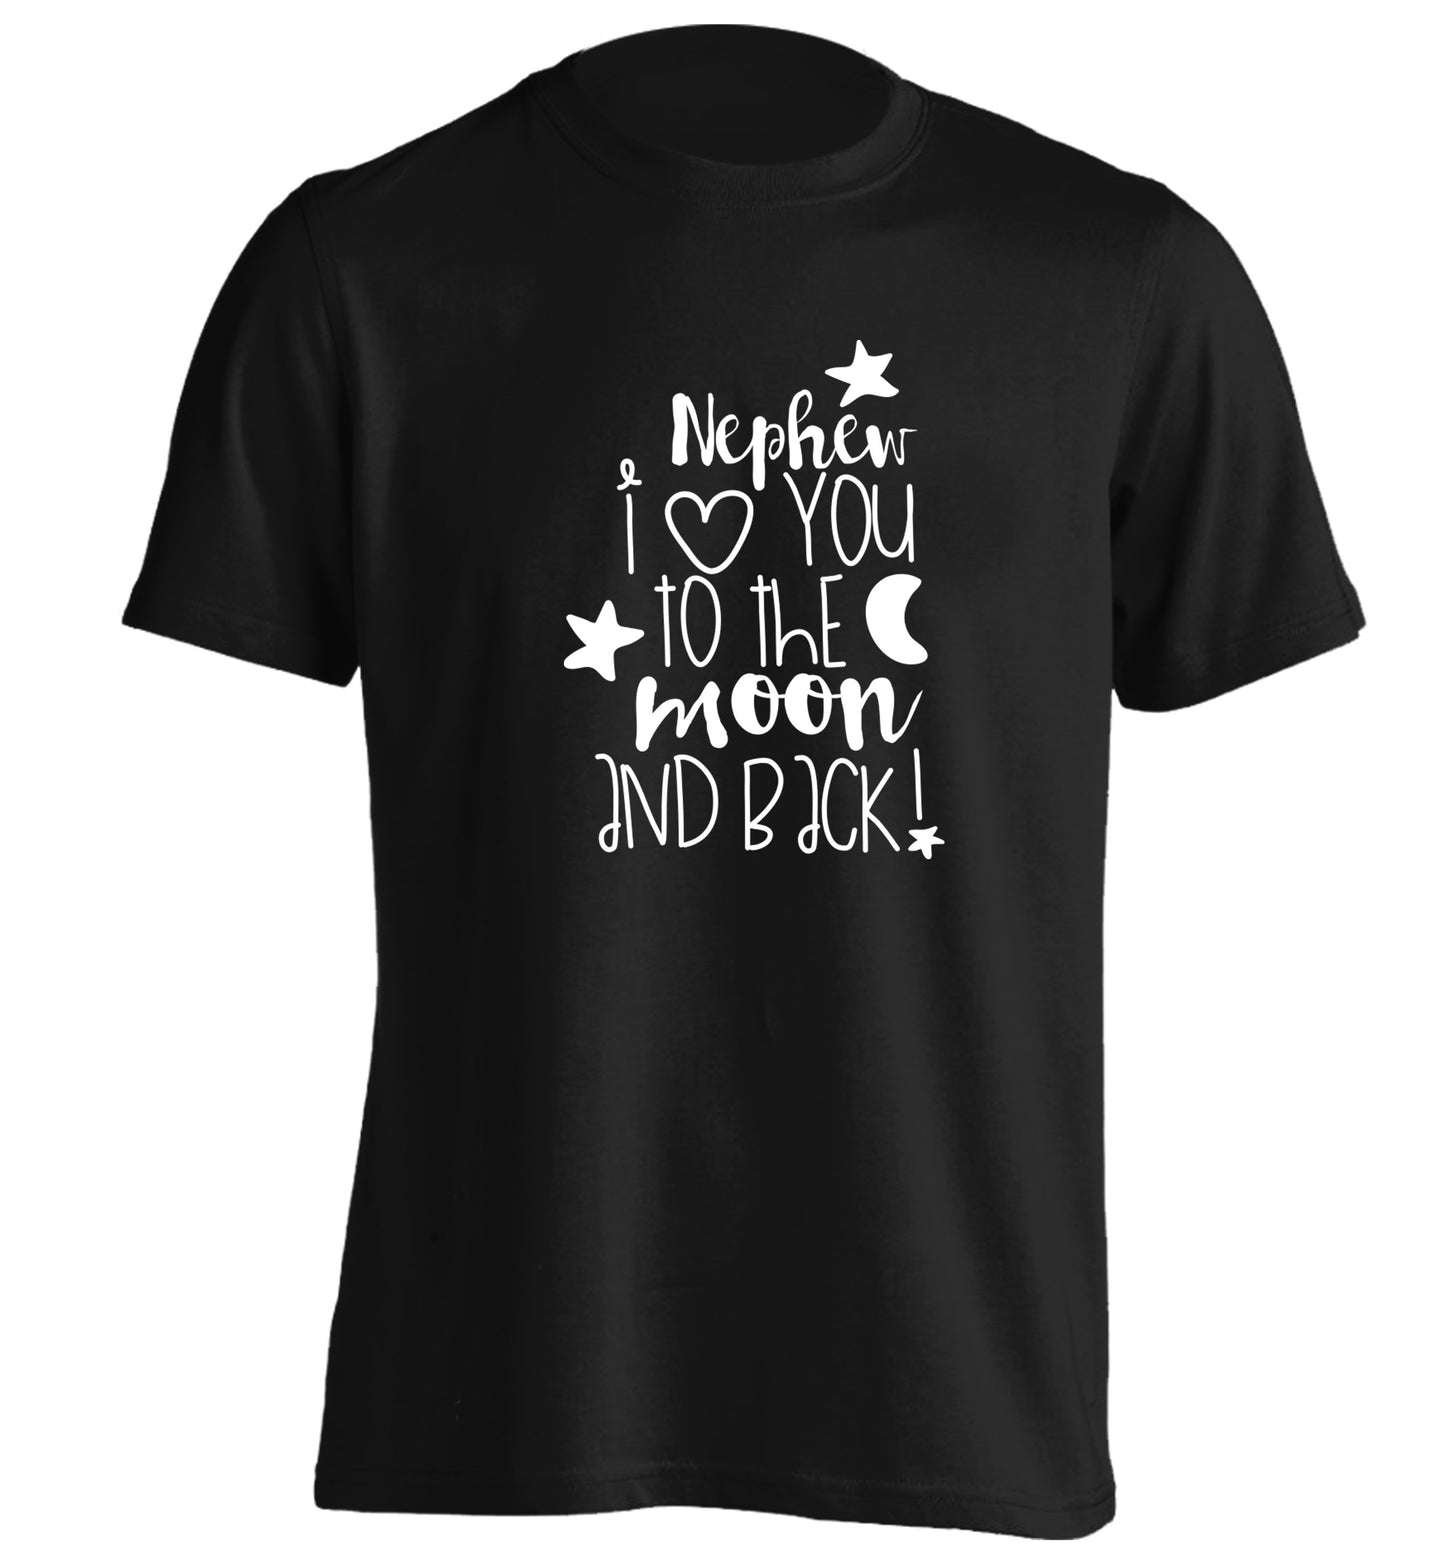 Nephew I love you to the moon and back adults unisex black Tshirt 2XL